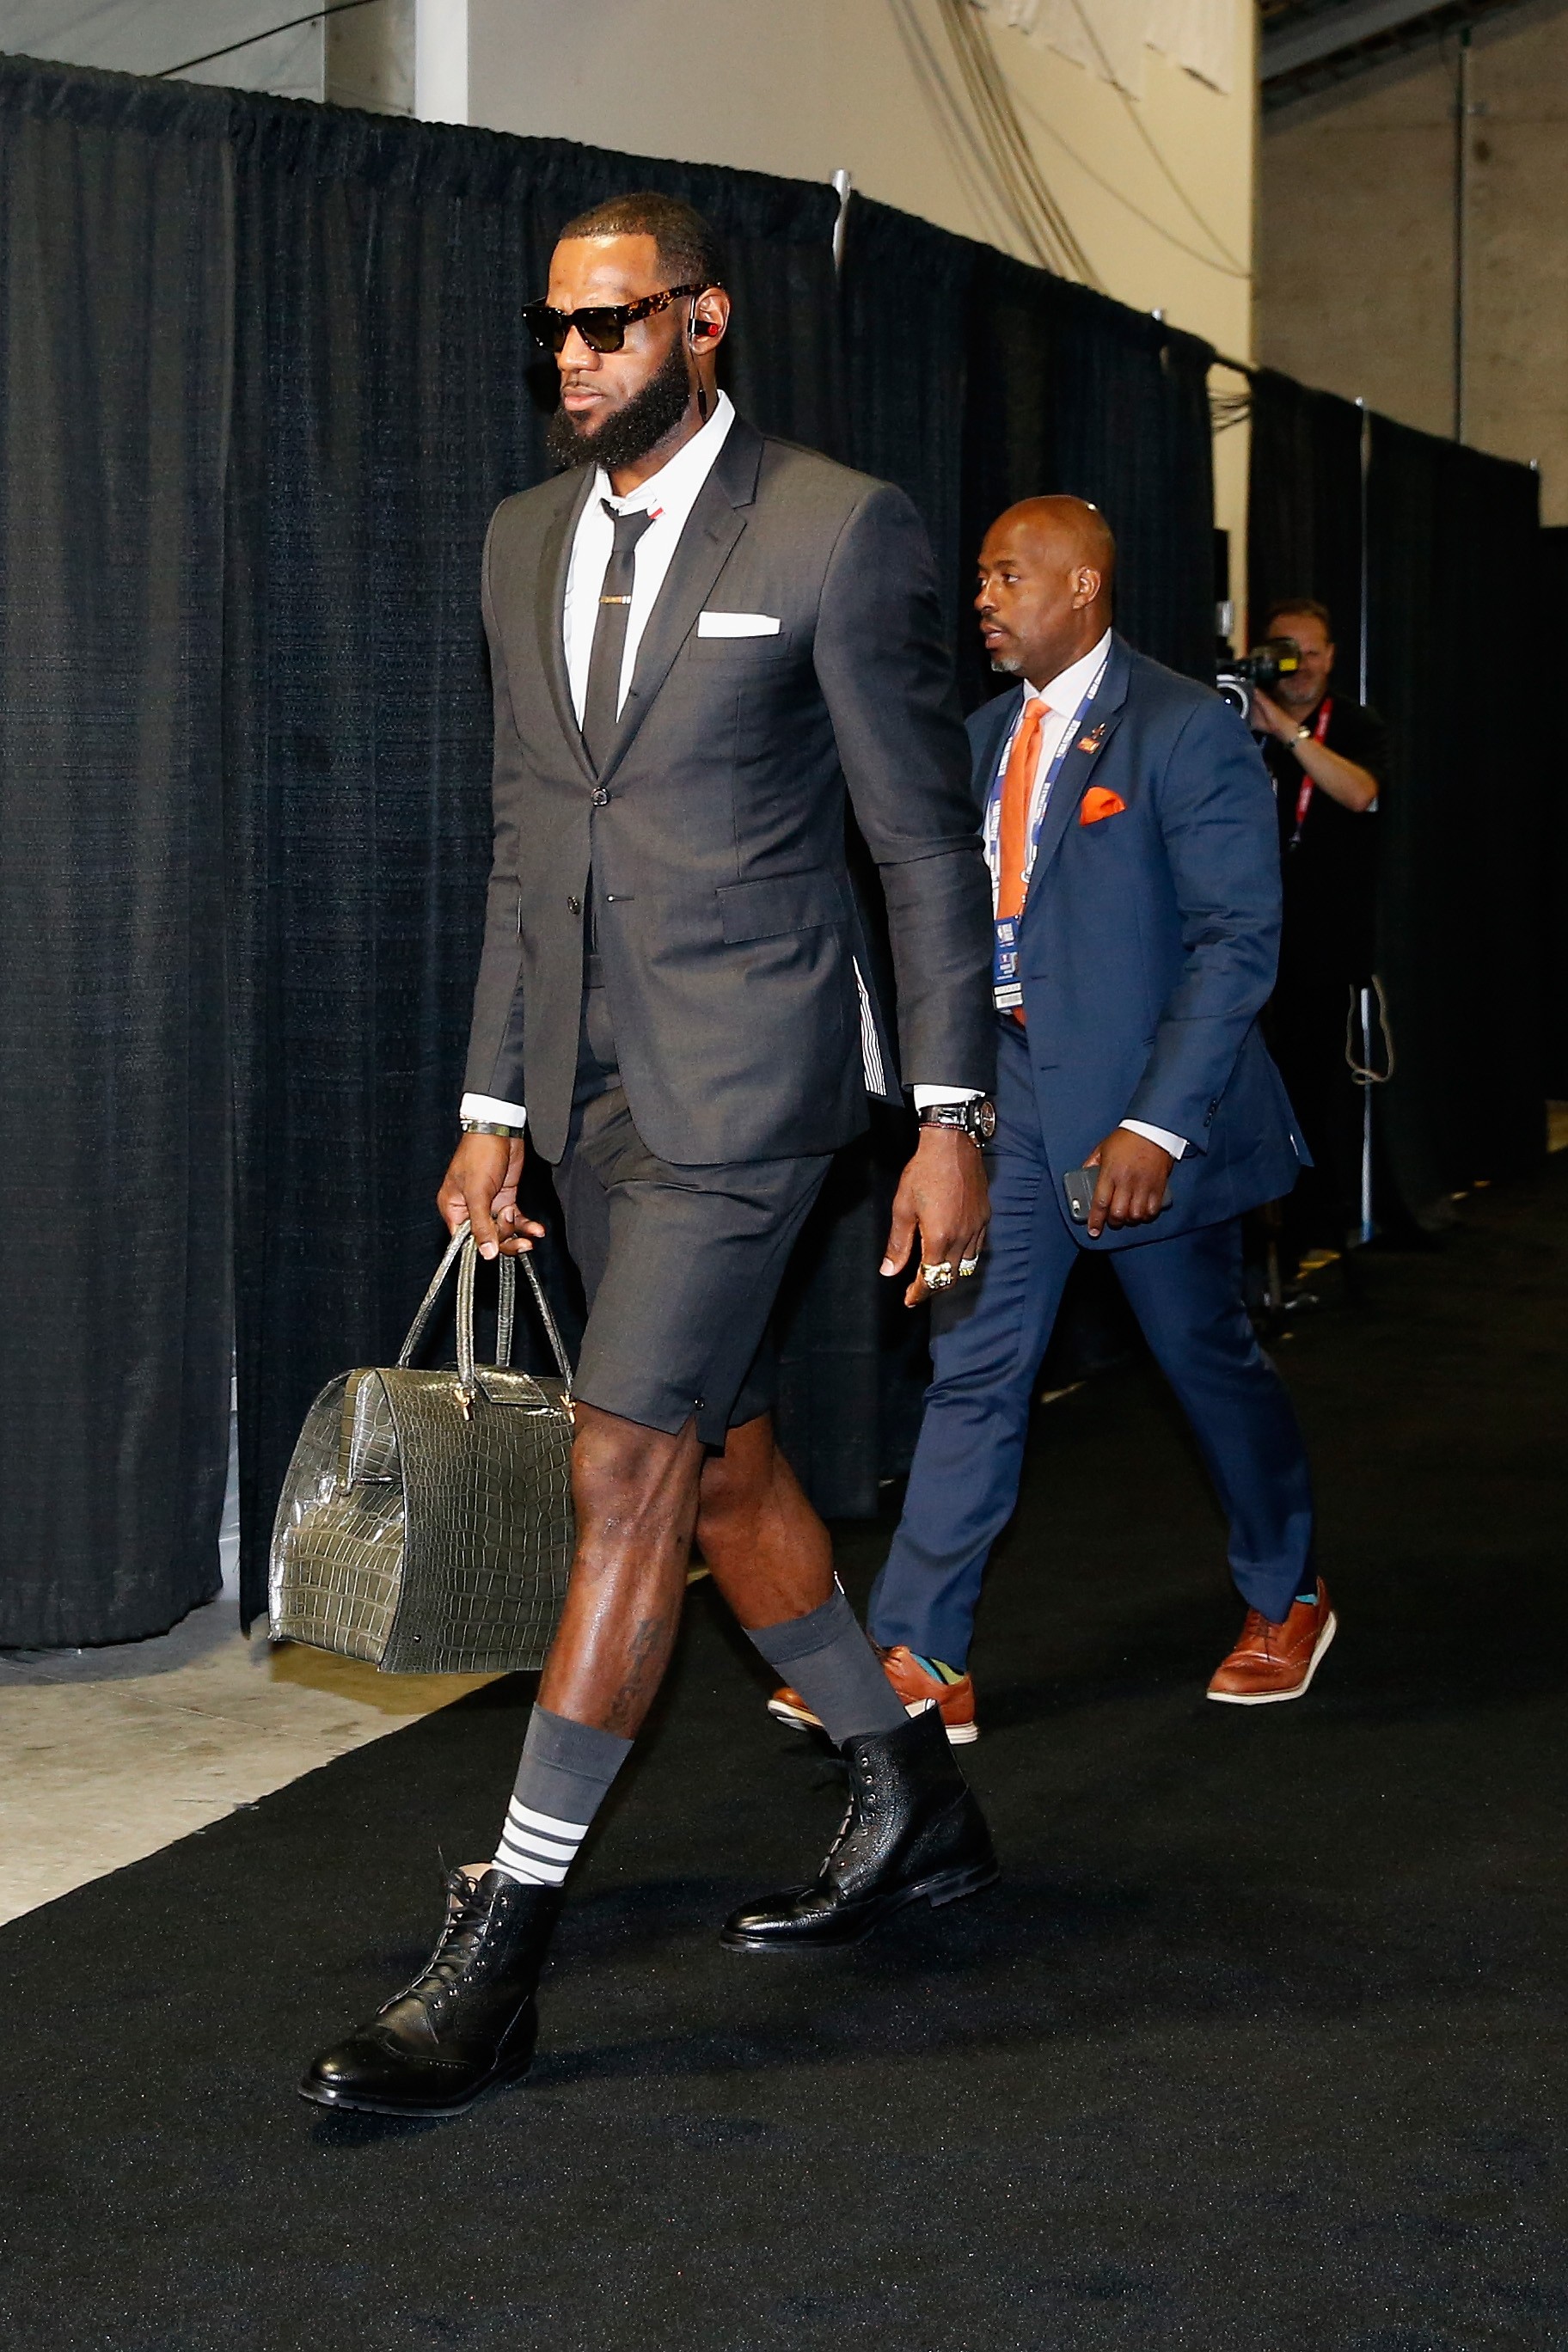 OAKLAND, CA - MAY 31:  LeBron James #23 of the Cleveland Cavaliers arrives for Game 1 of the 2018 NBA Finals at ORACLE Arena on May 31, 2018 in Oakland, California. NOTE TO USER: User expressly acknowledges and agrees that, by downloading and or using thi (Foto: Getty Images)